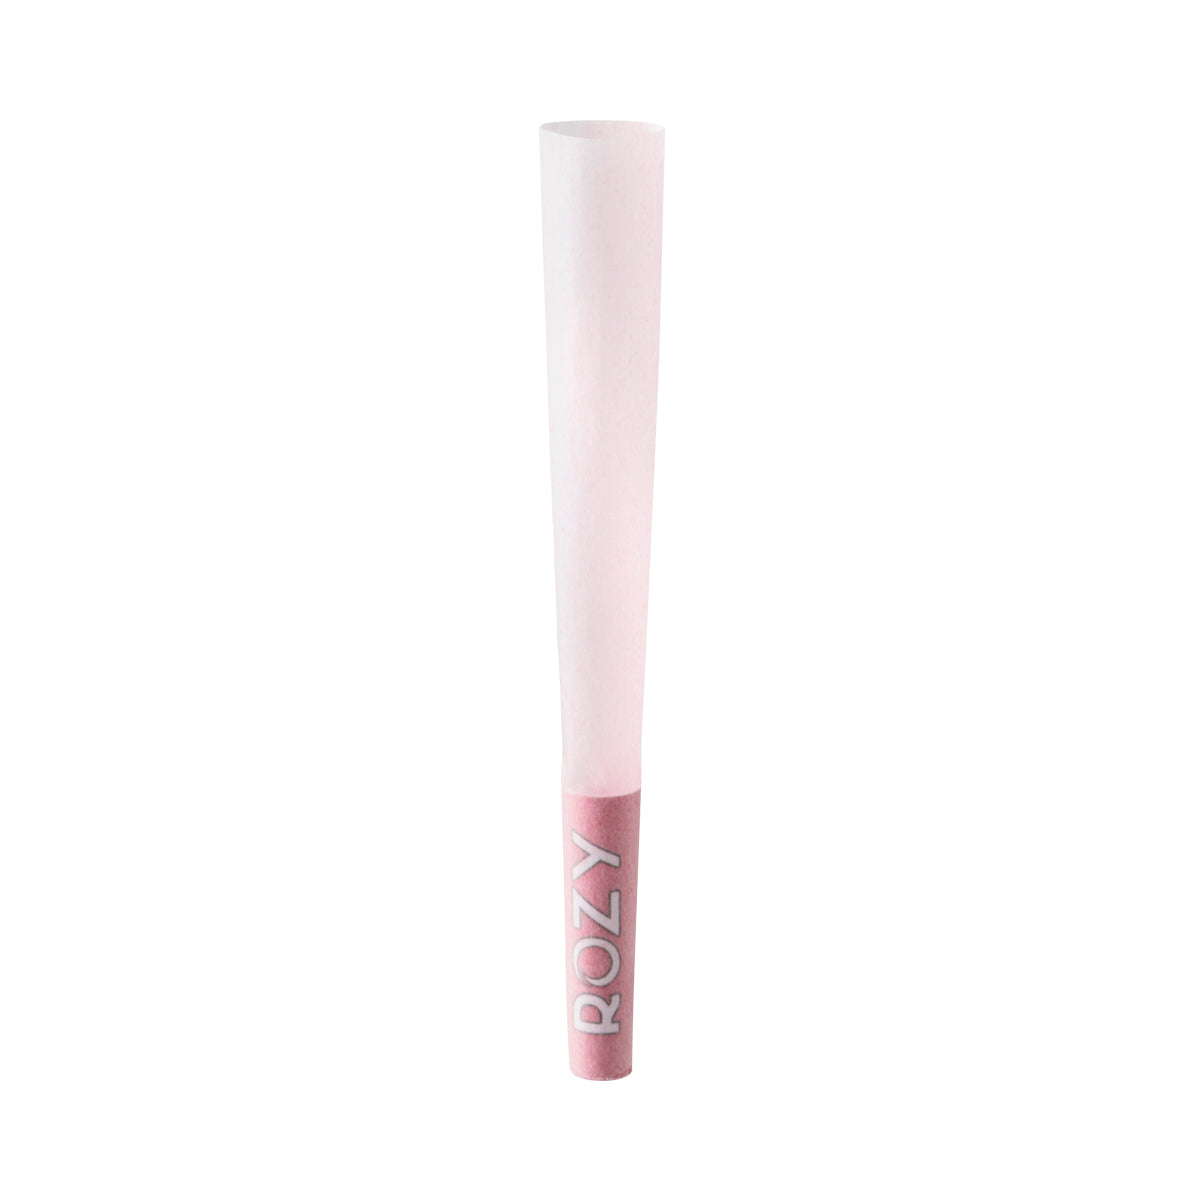 Rozy Pink | Pre-Rolled Cones 1¼ Size Jar | 84mm - Pink - 50 Count Pre-Rolled Cones Rozy   